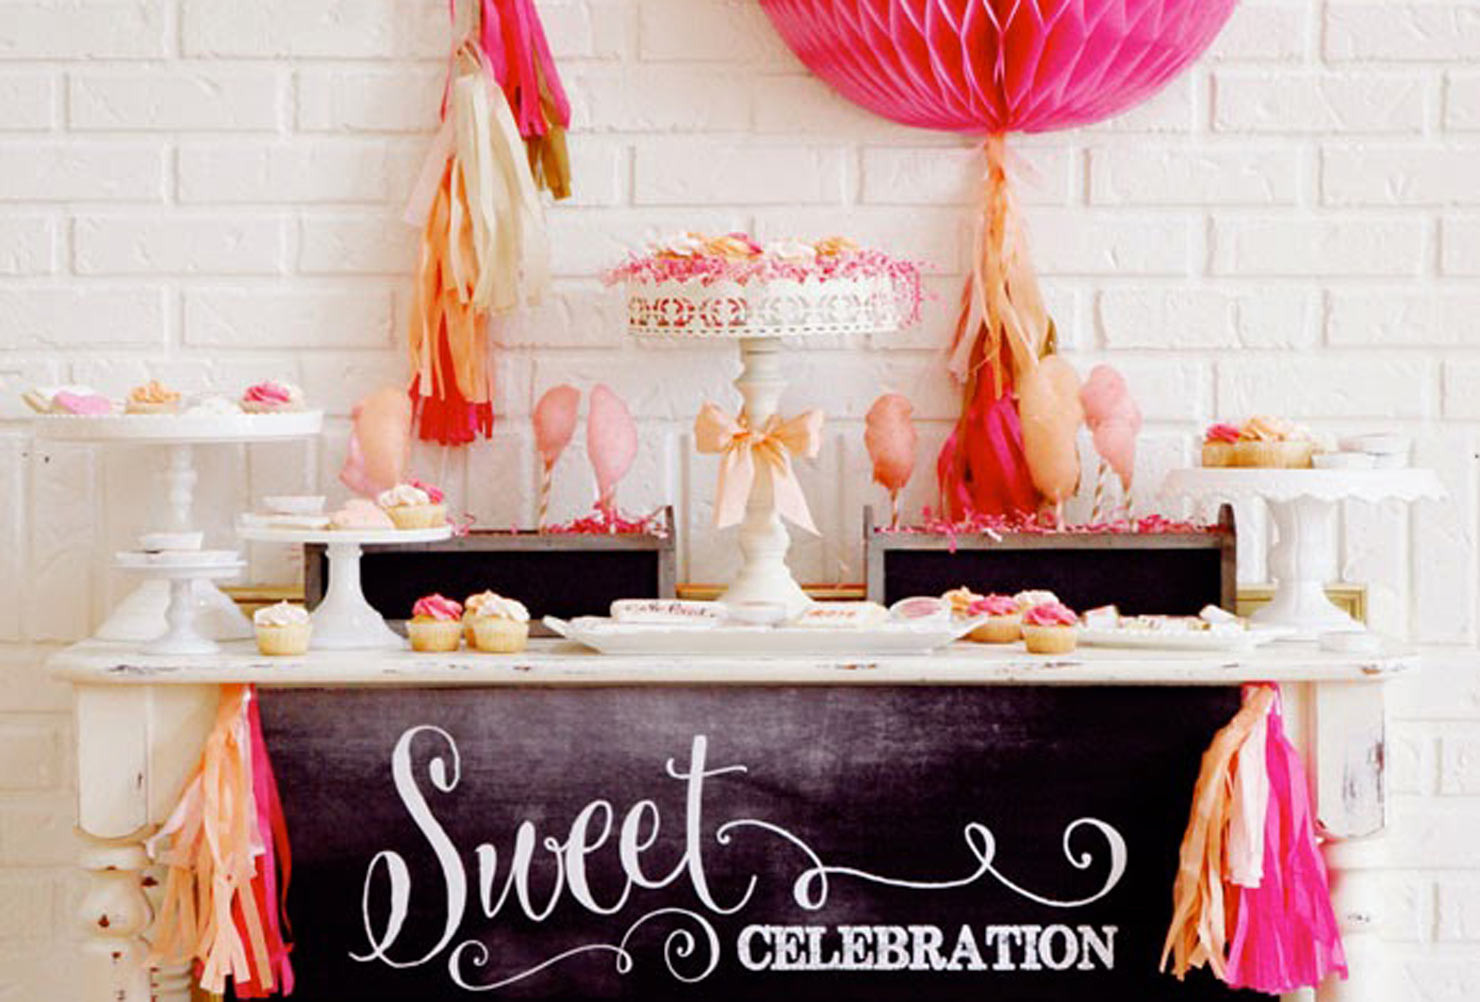 Colorful Graduation Party Ideas
 90 Graduation Party Ideas for High School & College 2019